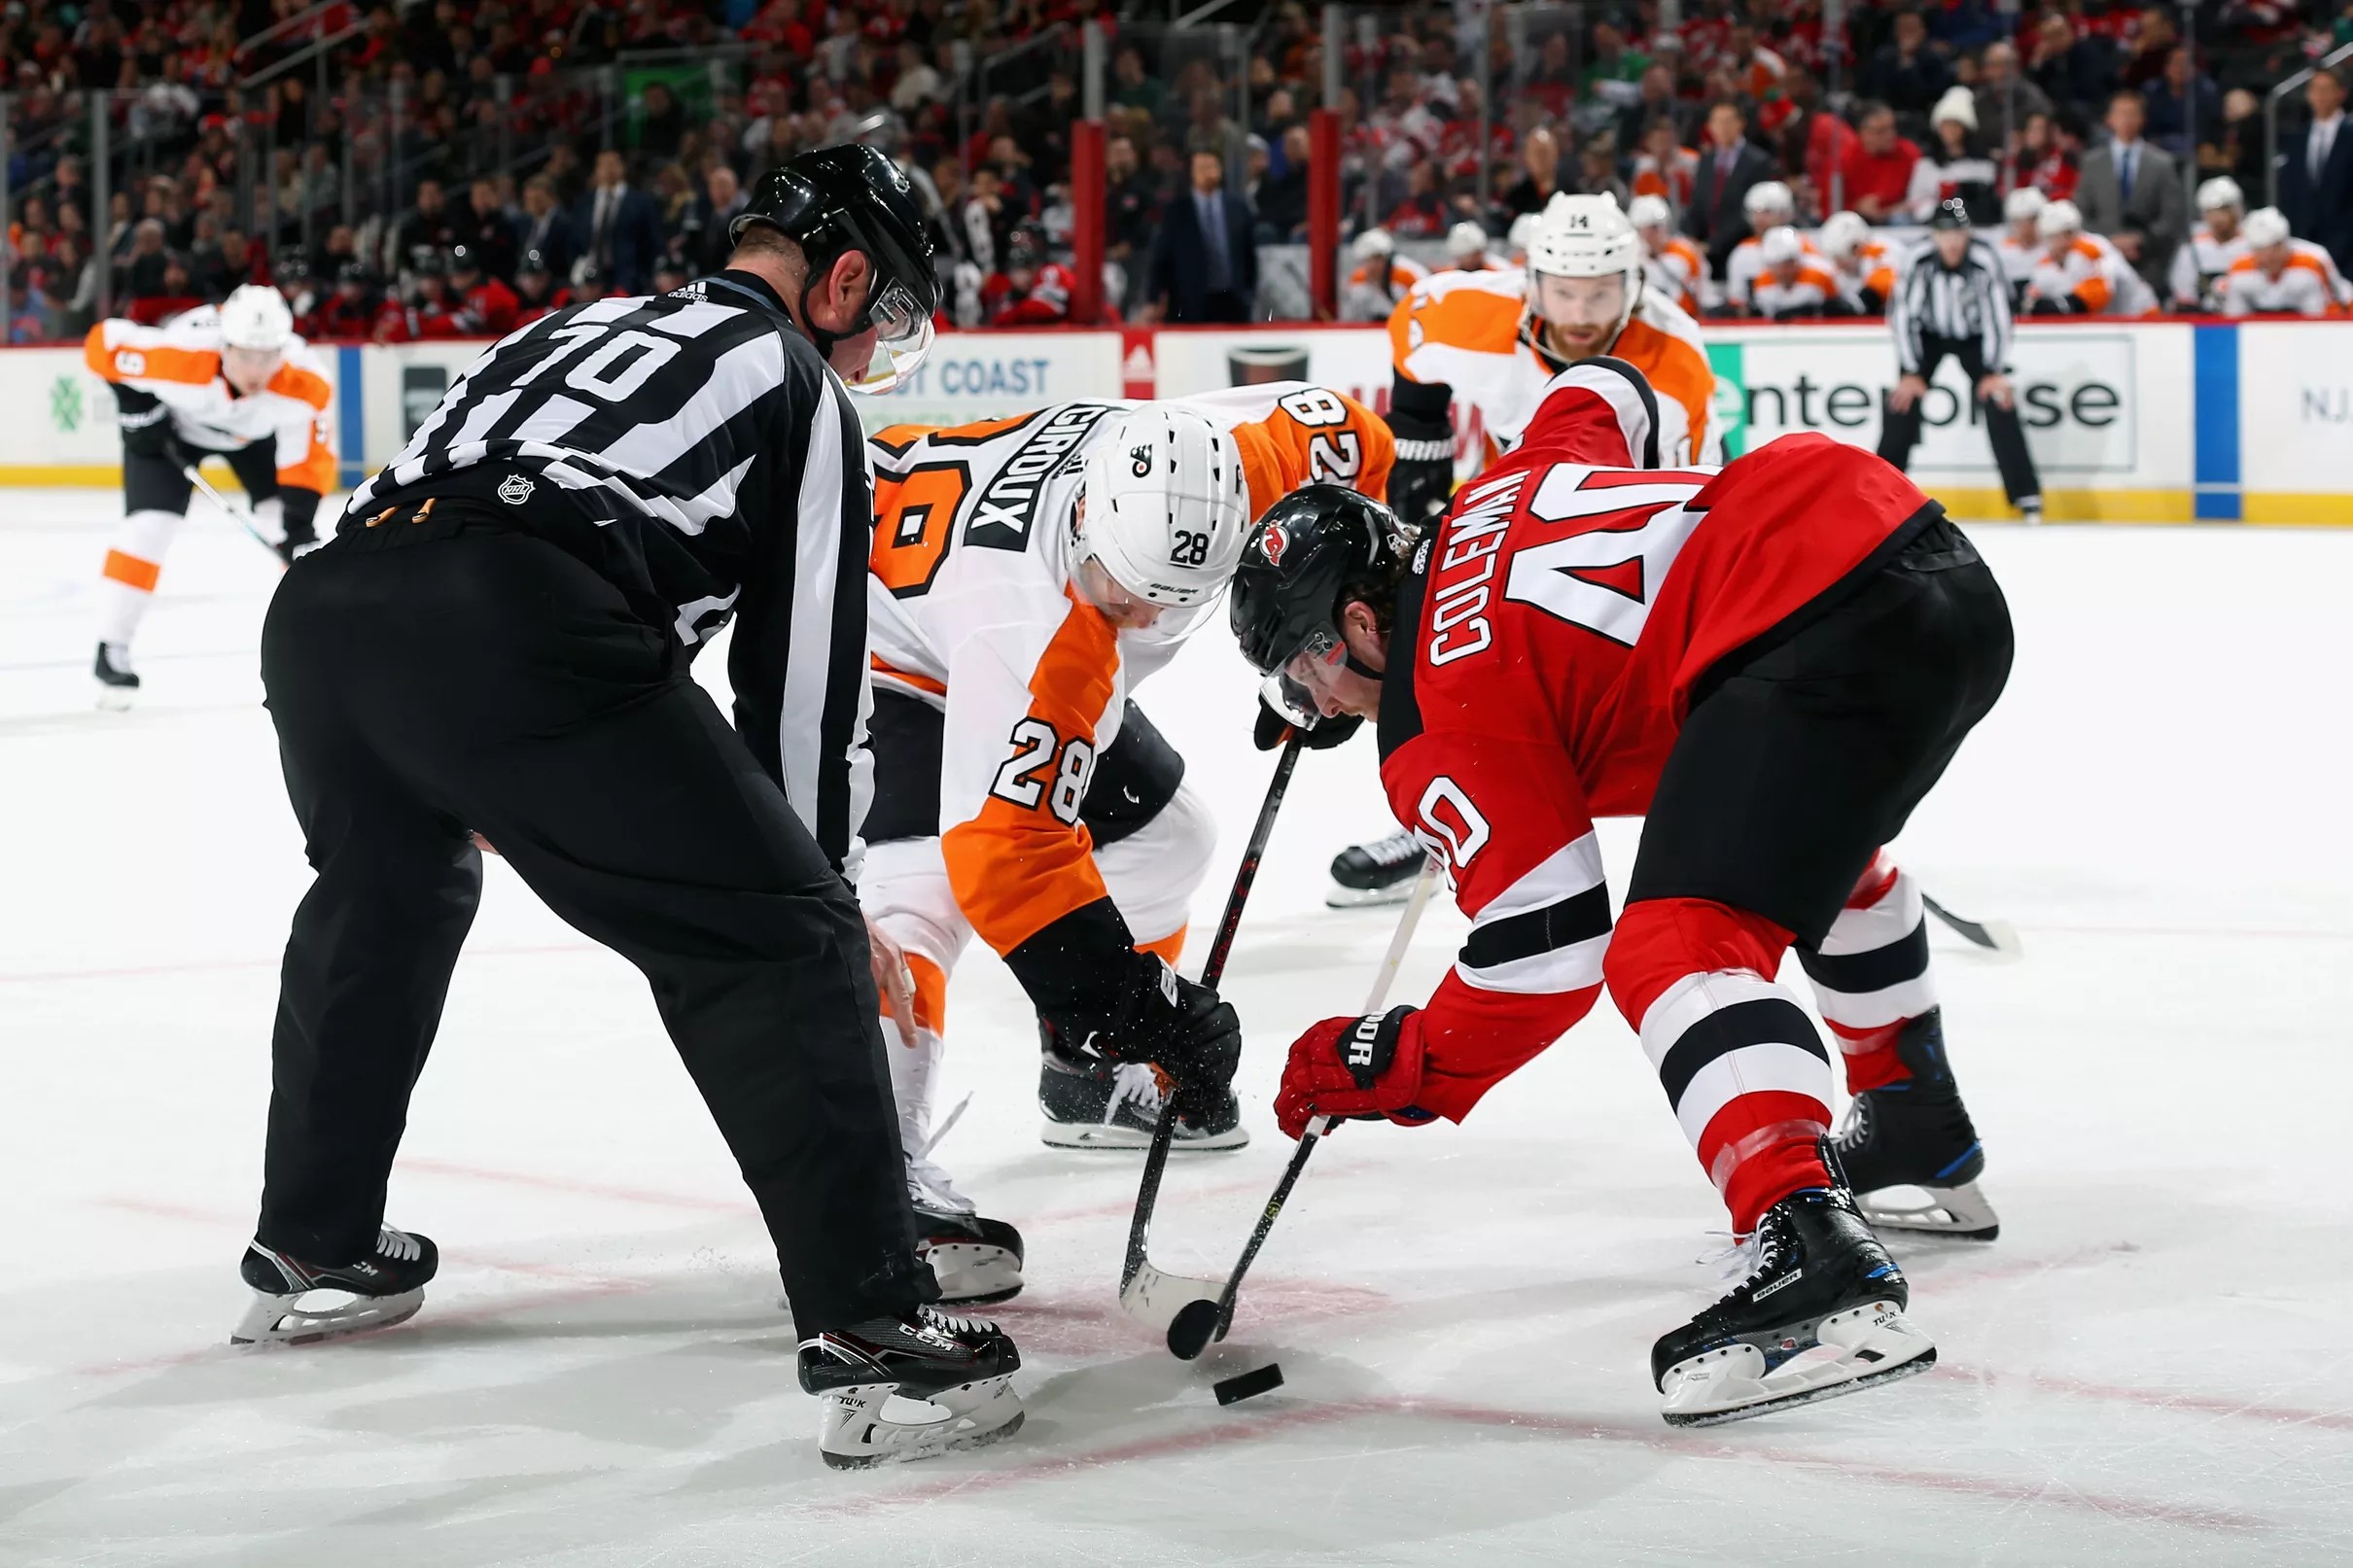 Flyers vs. Devils lineups, start time, TV, radio, live stream and